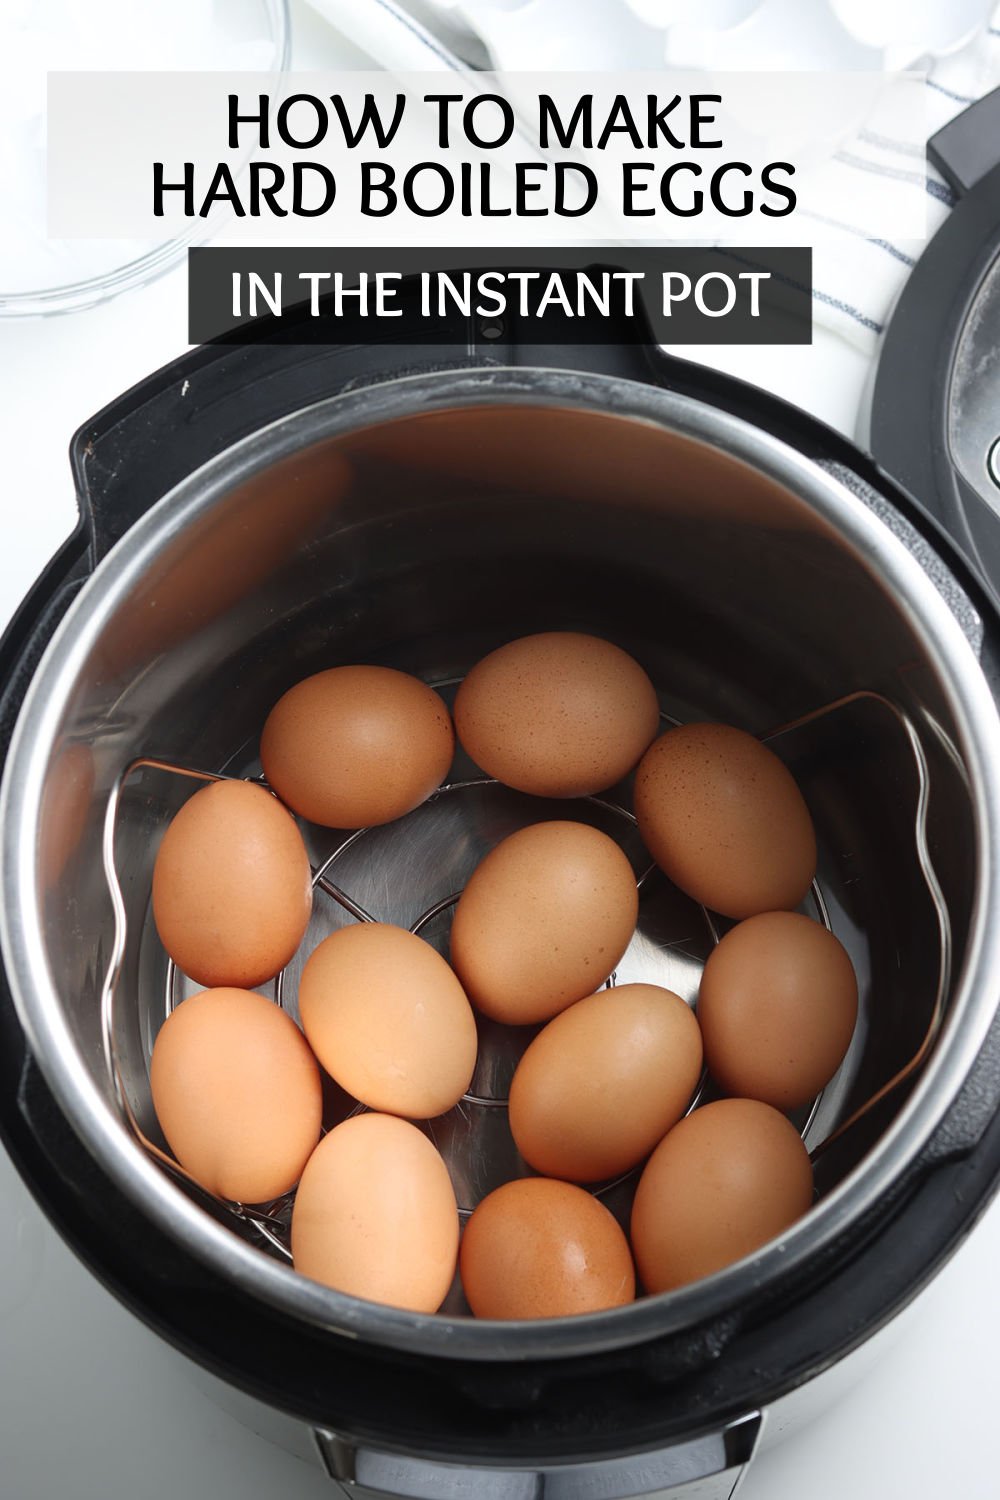 Boiled eggs in the Instant Pot? Say what? Trust me. I was just as skeptical as you probably are. But after making boiled eggs in the Instant Pot, I'm convinced it is the easiest method. The Instant Pot cooks eggs perfectly every. Single. Time. And trust me when I say I have tried A LOT of methods for boiling eggs. | www.persnicketyplates.com